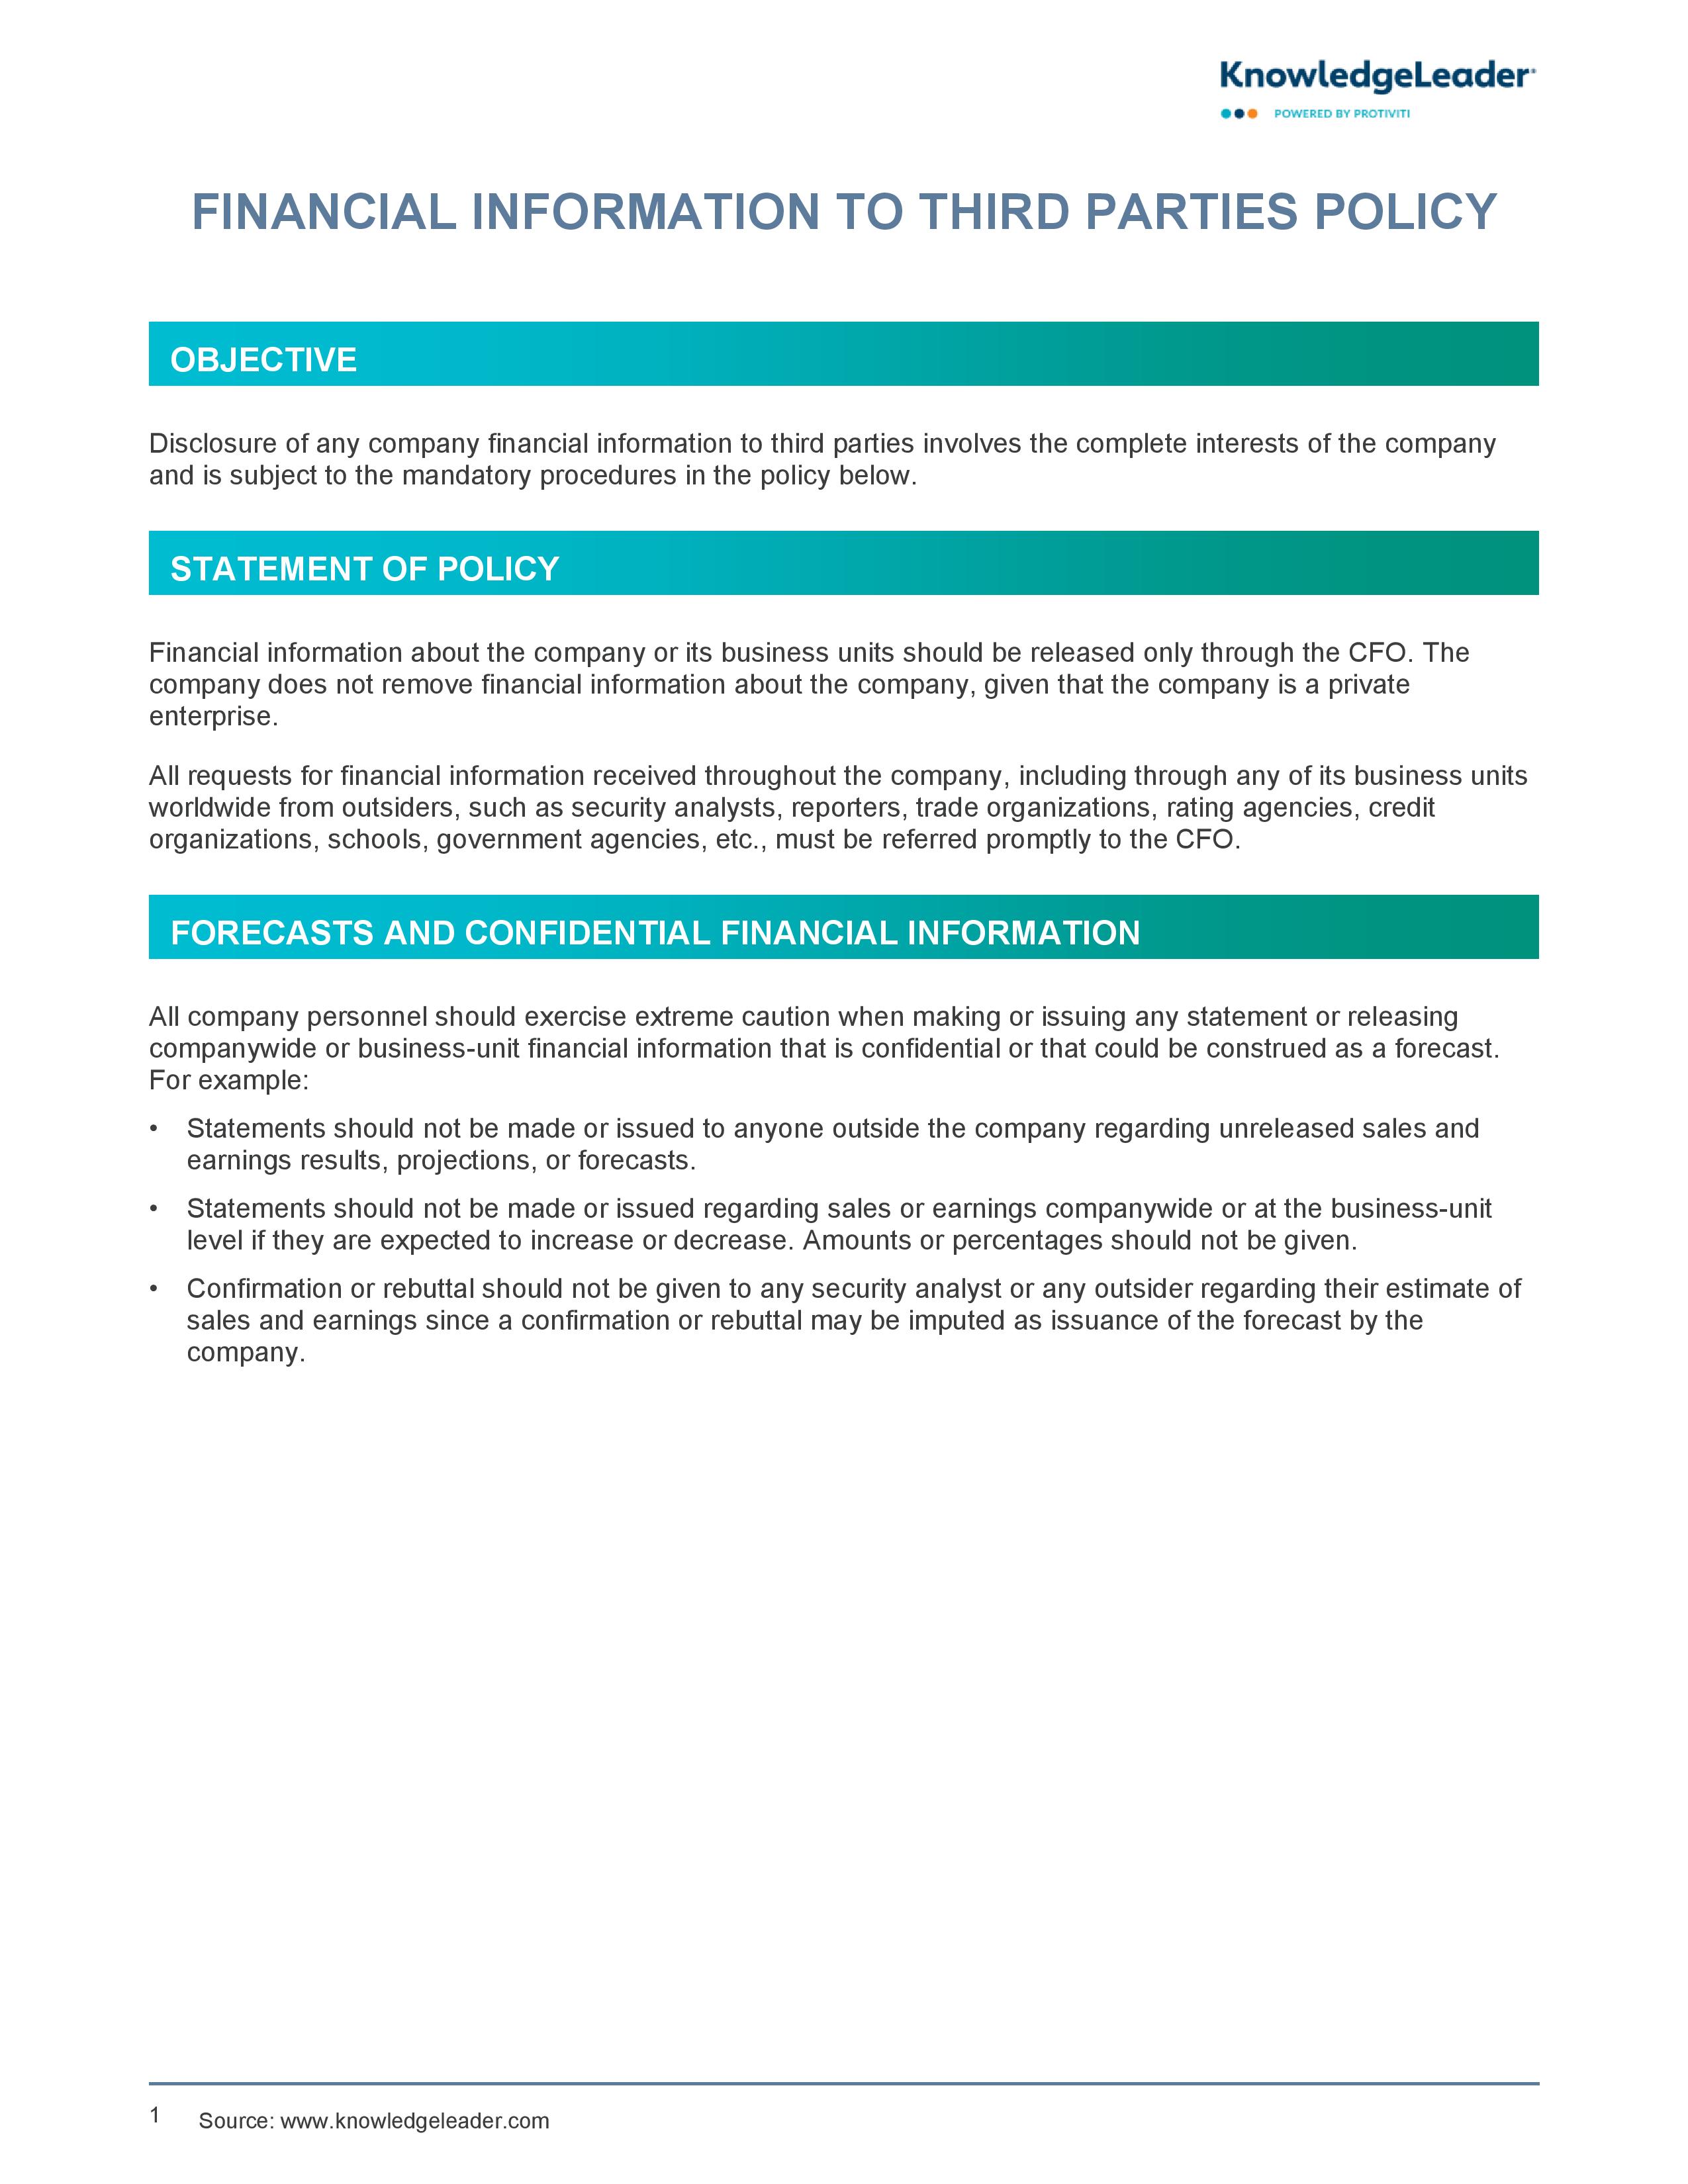 Screenshot of the first page of Financial Information to Third Parties Policy